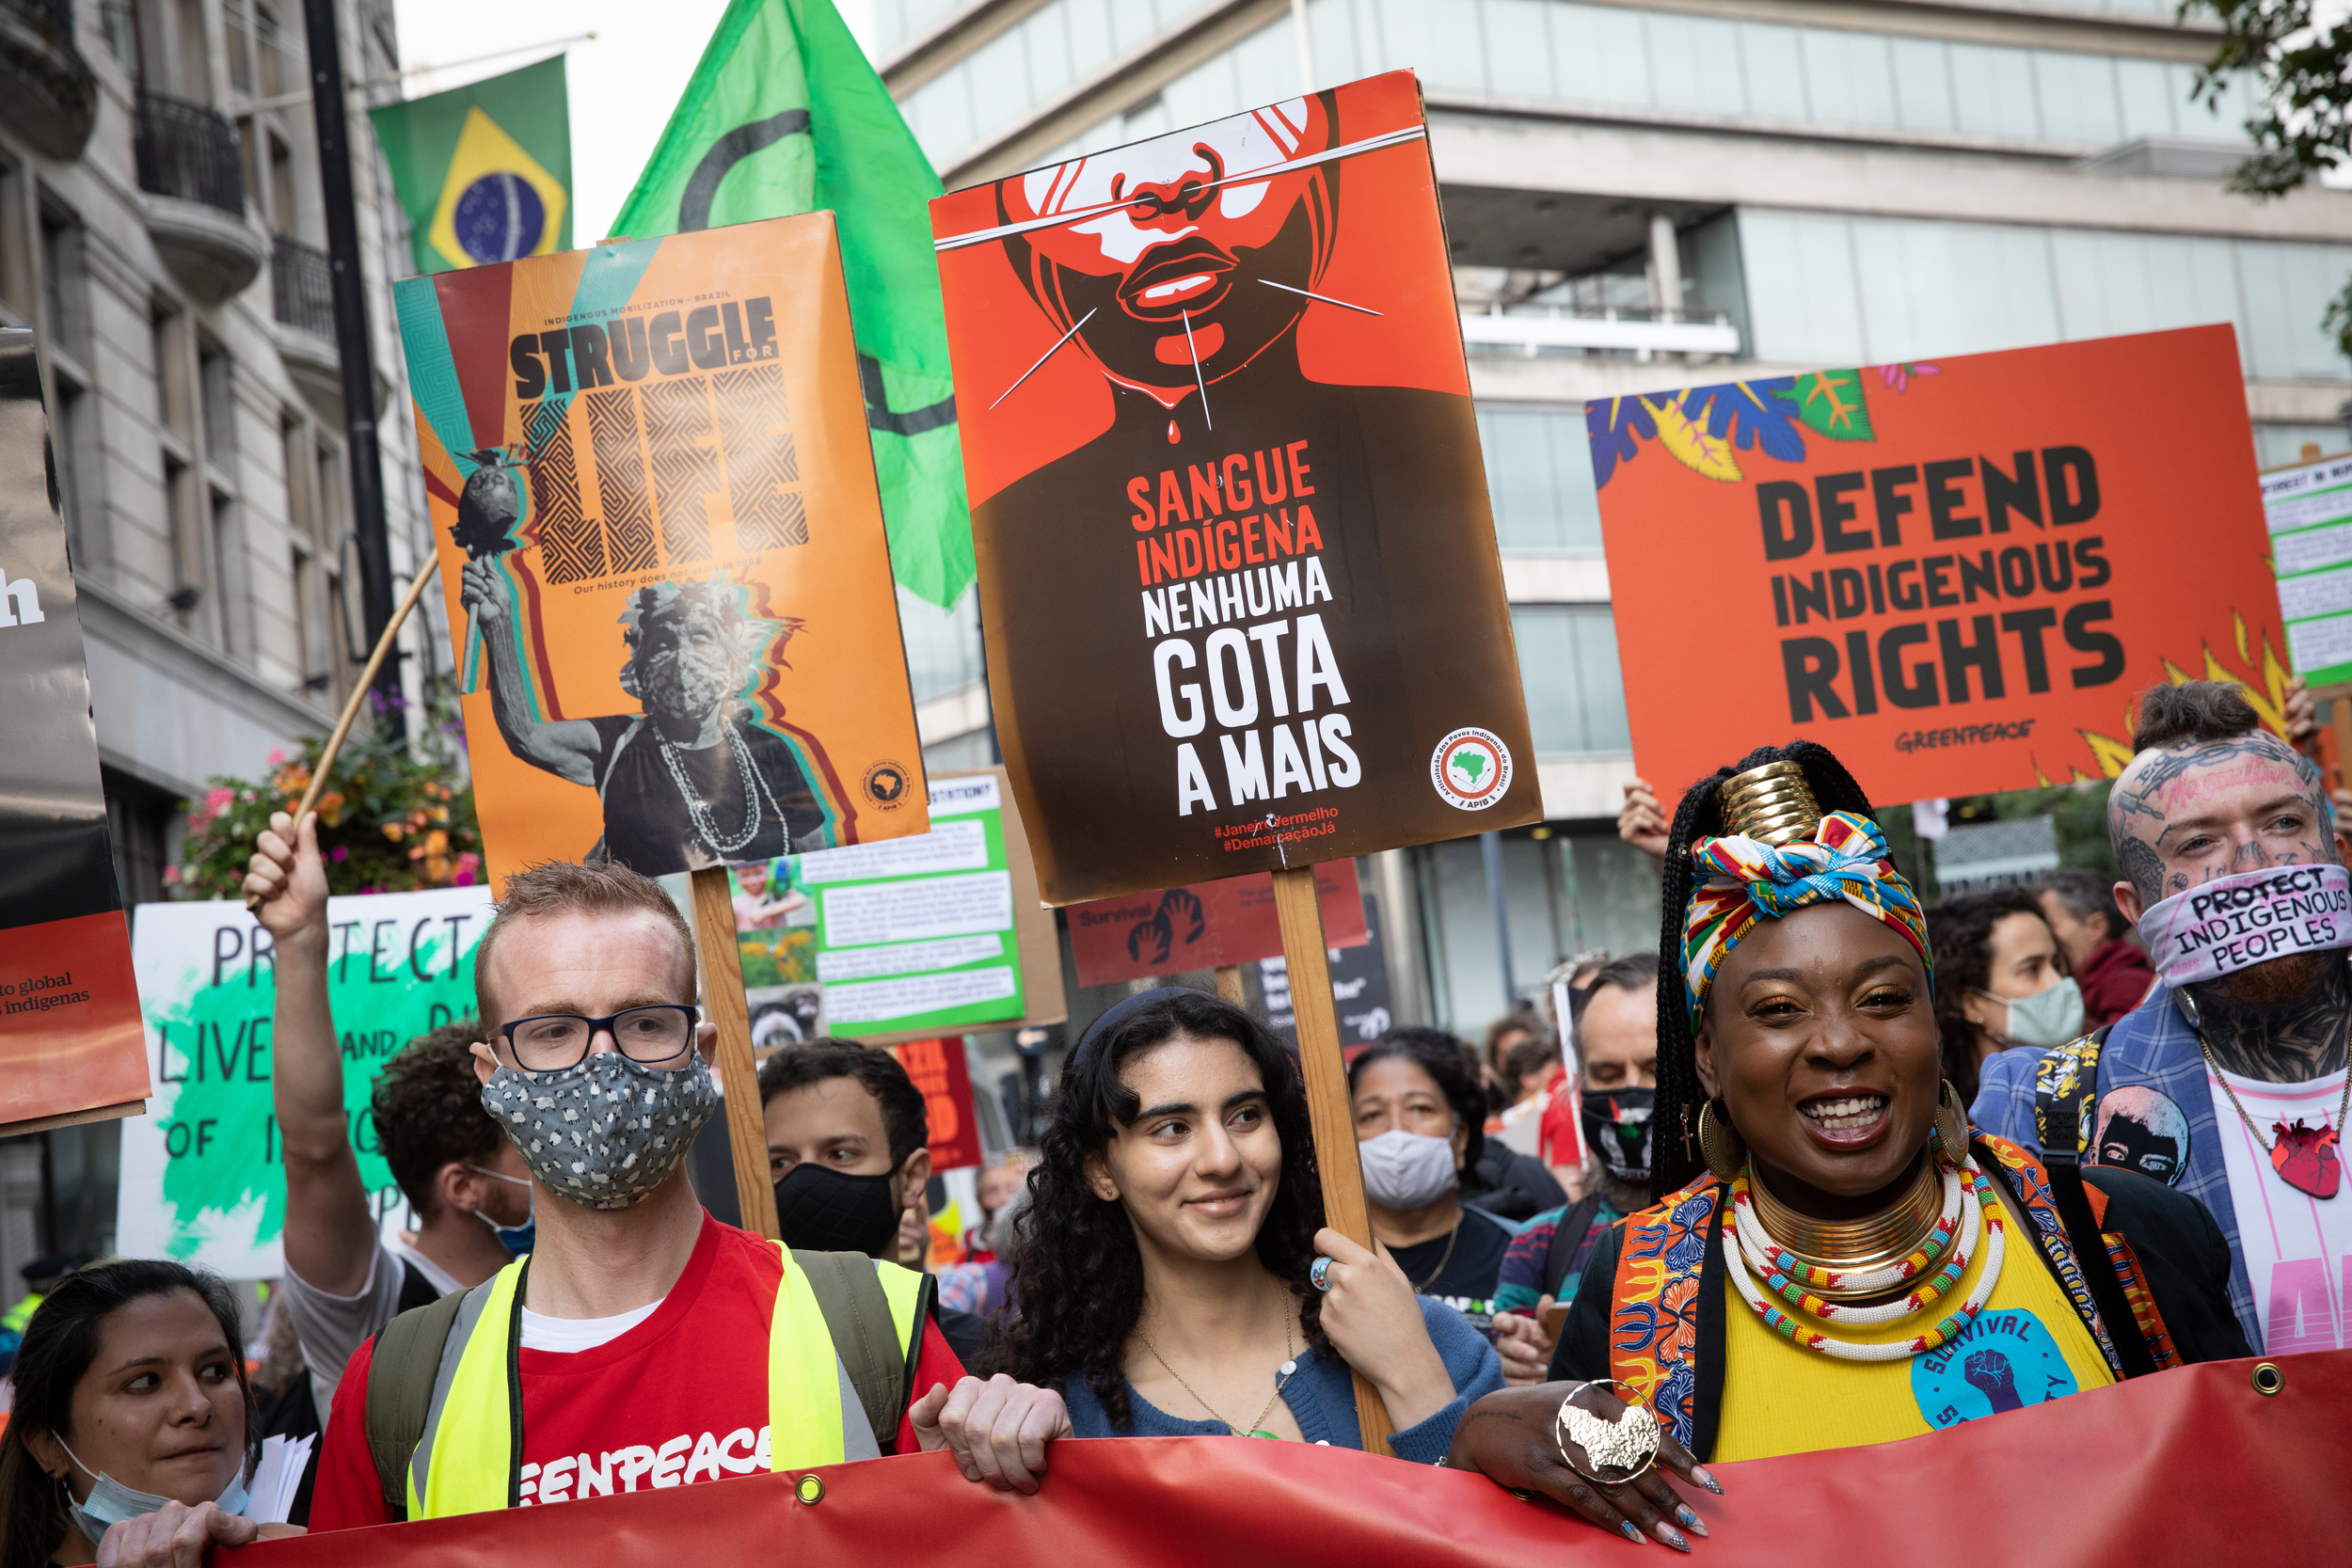 A group of protestors at a march, smiling. They hold banners, which read "Struggle [for] life", "Defend Indigenous rights", "protect indigenous peoples". One sign in Portugese, reads "Sangue Indigena Nunhuma Gota a mais"